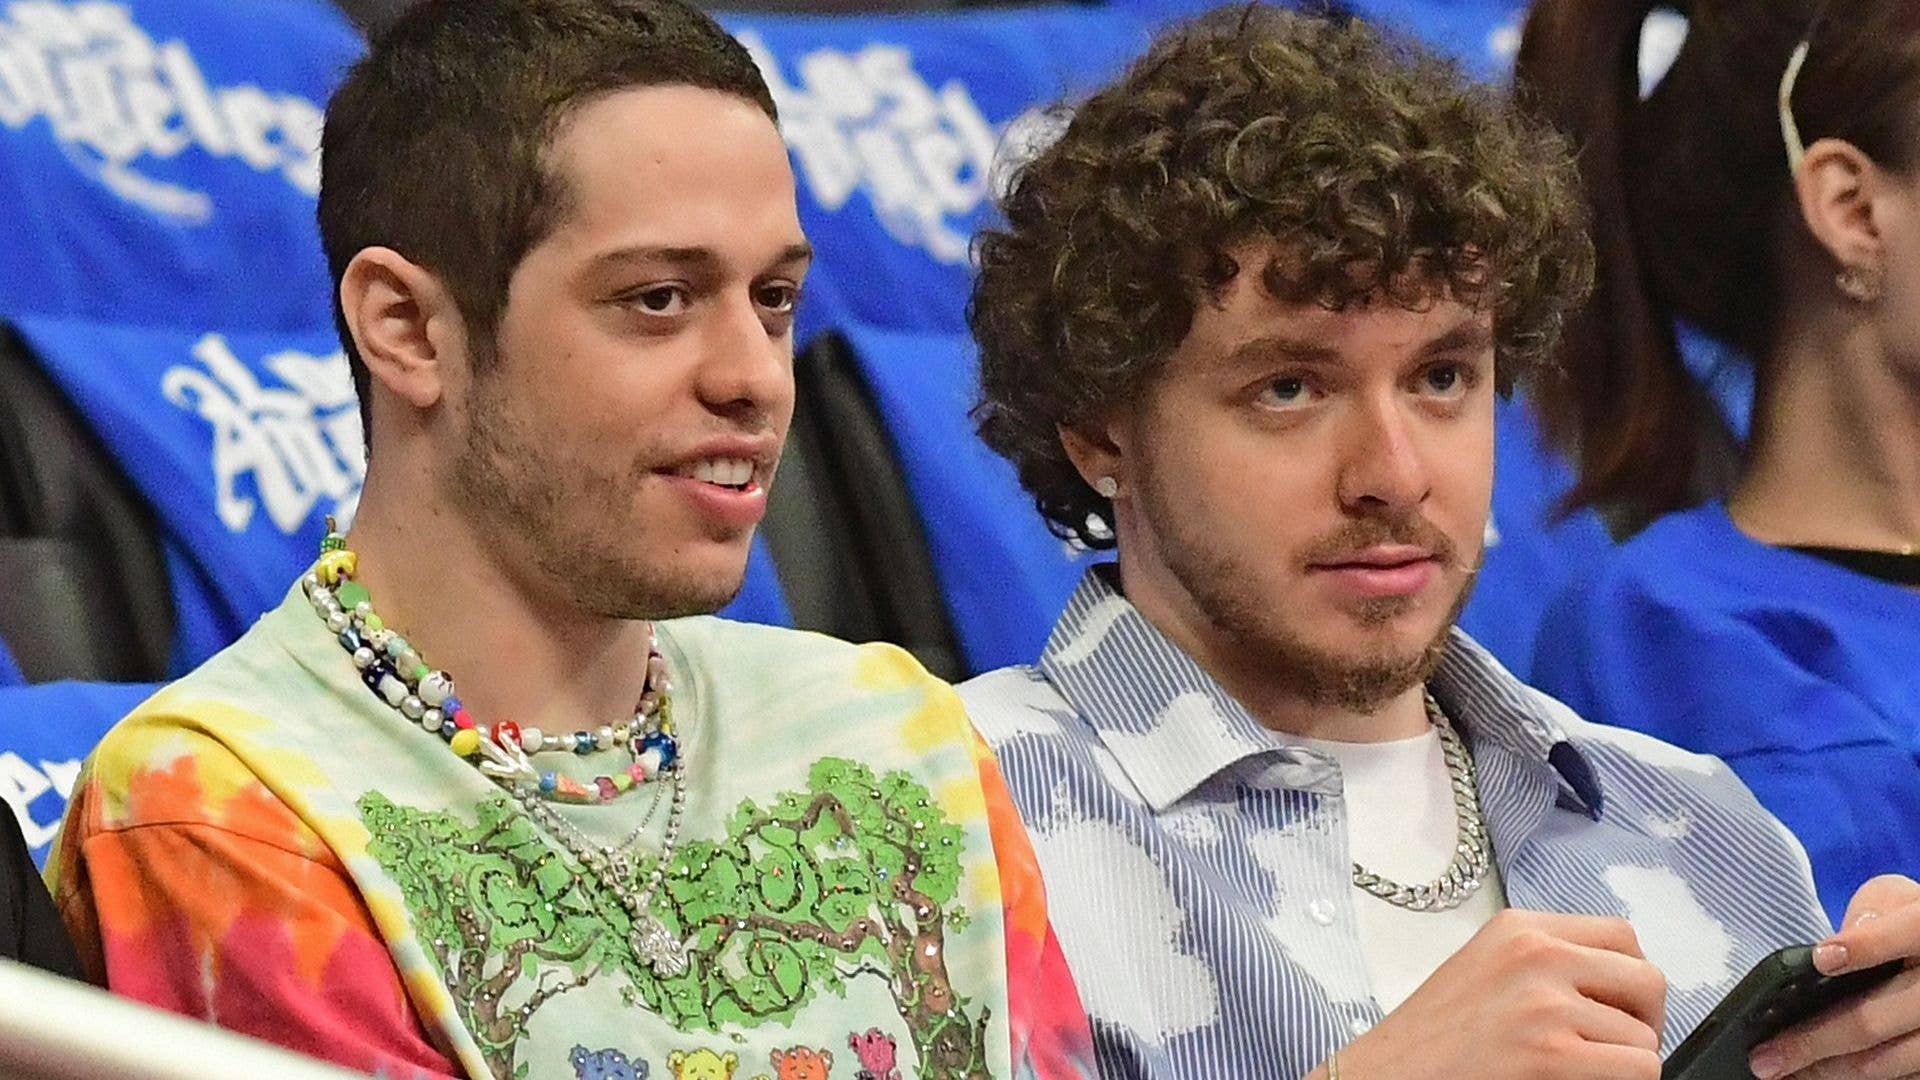 Pete Davidson and rapper Jack Harlow attend a Phoenix Suns game